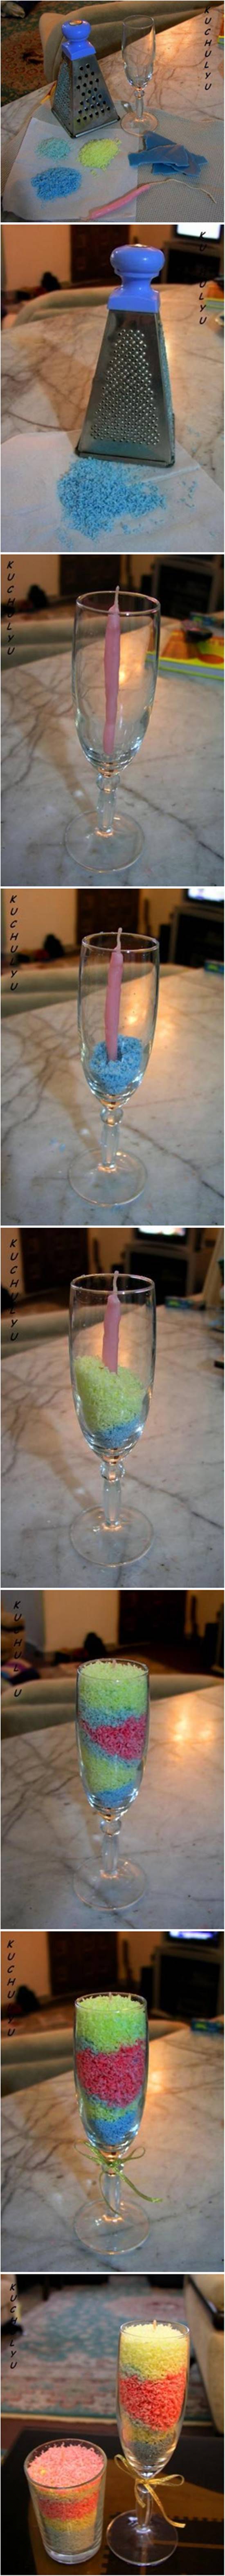 How to DIY Beautiful Layered Grated Candle